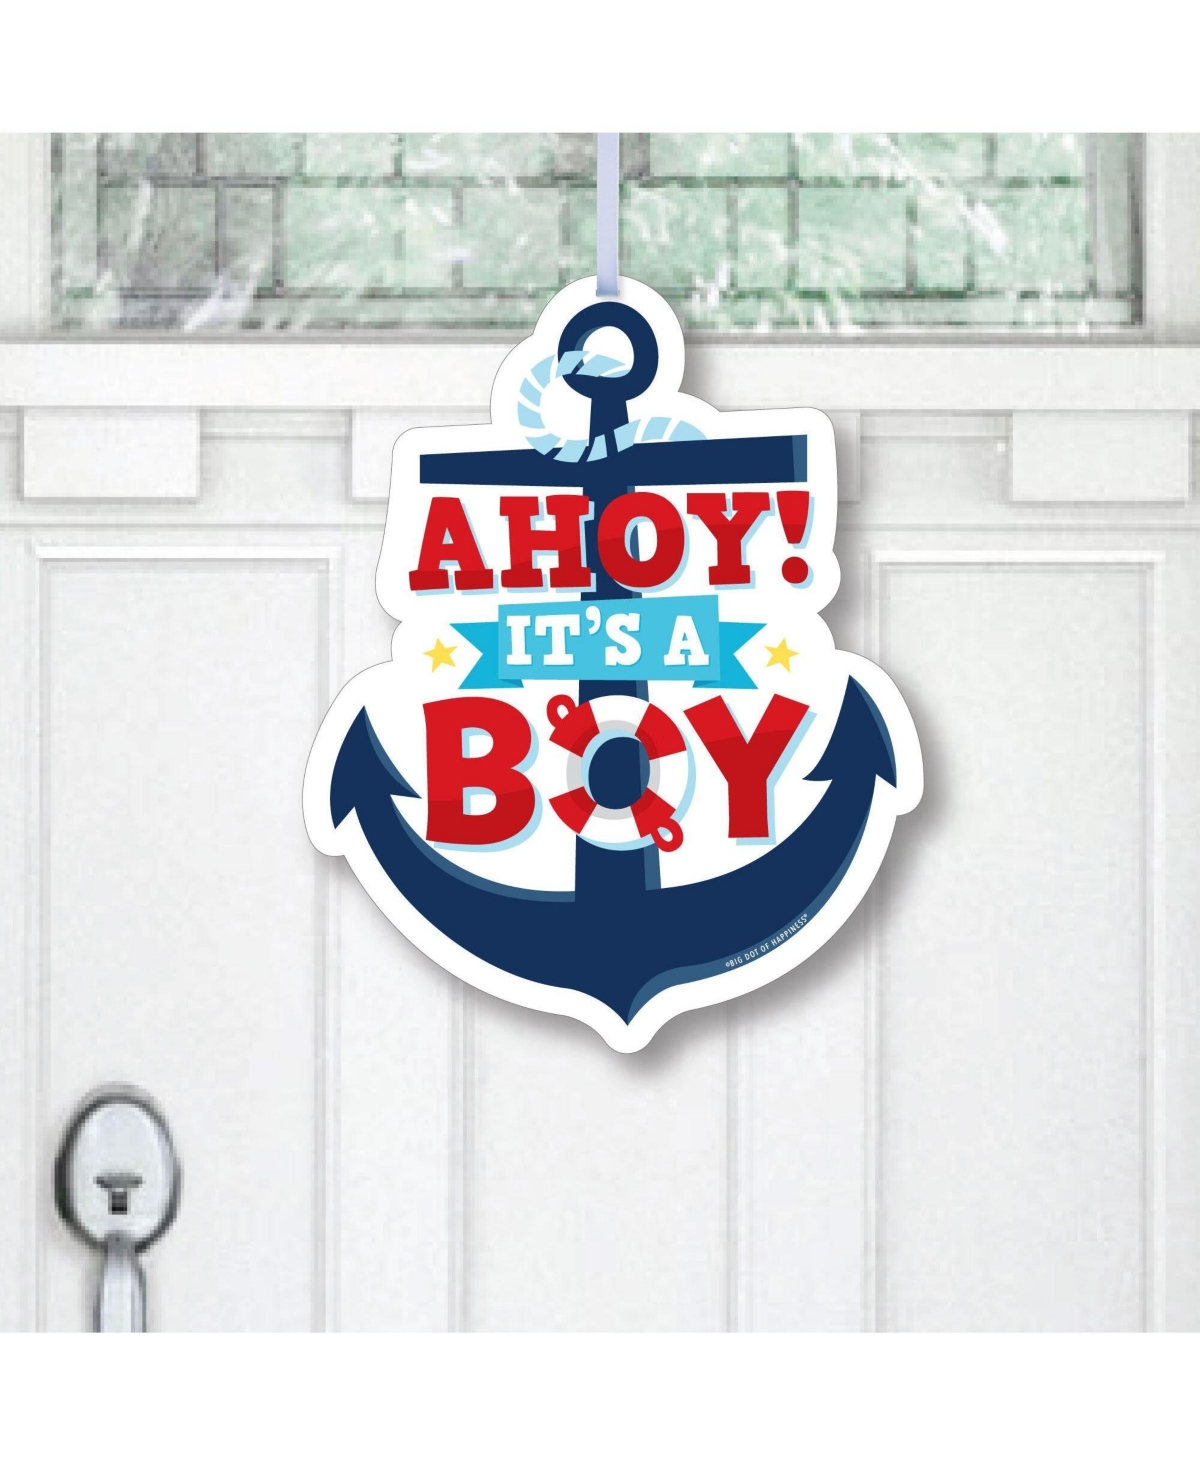 Ahoy Its a Boy - Hanging Porch Baby Shower Outdoor Front Door Decor - 1 Pc Sign